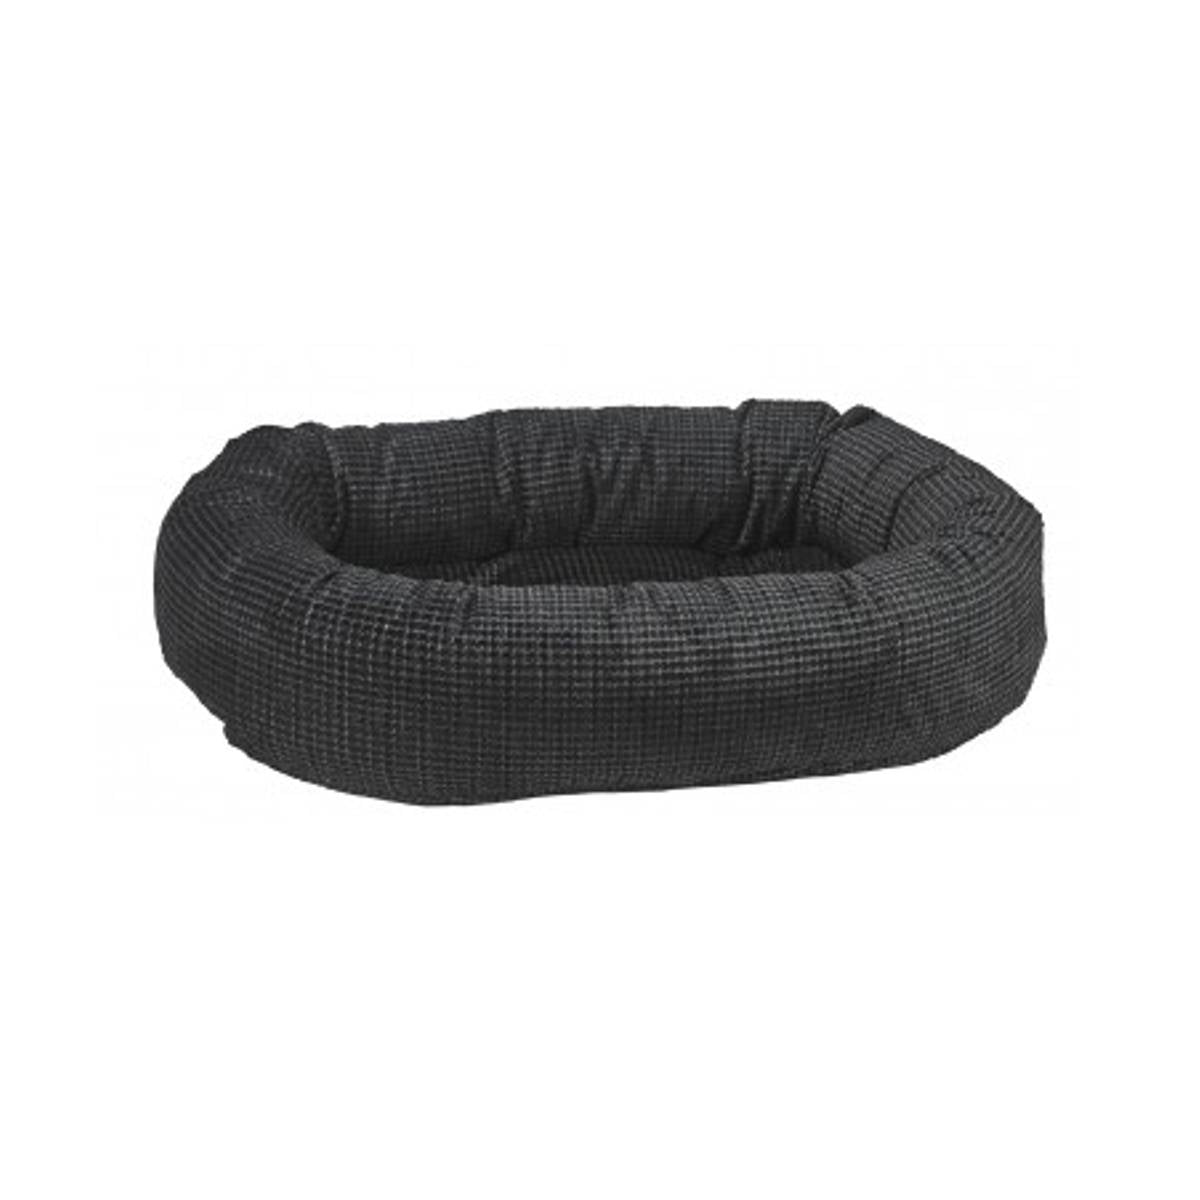 Donut Dog Pet Bed in Iron Mountain | Pawlicious & Company